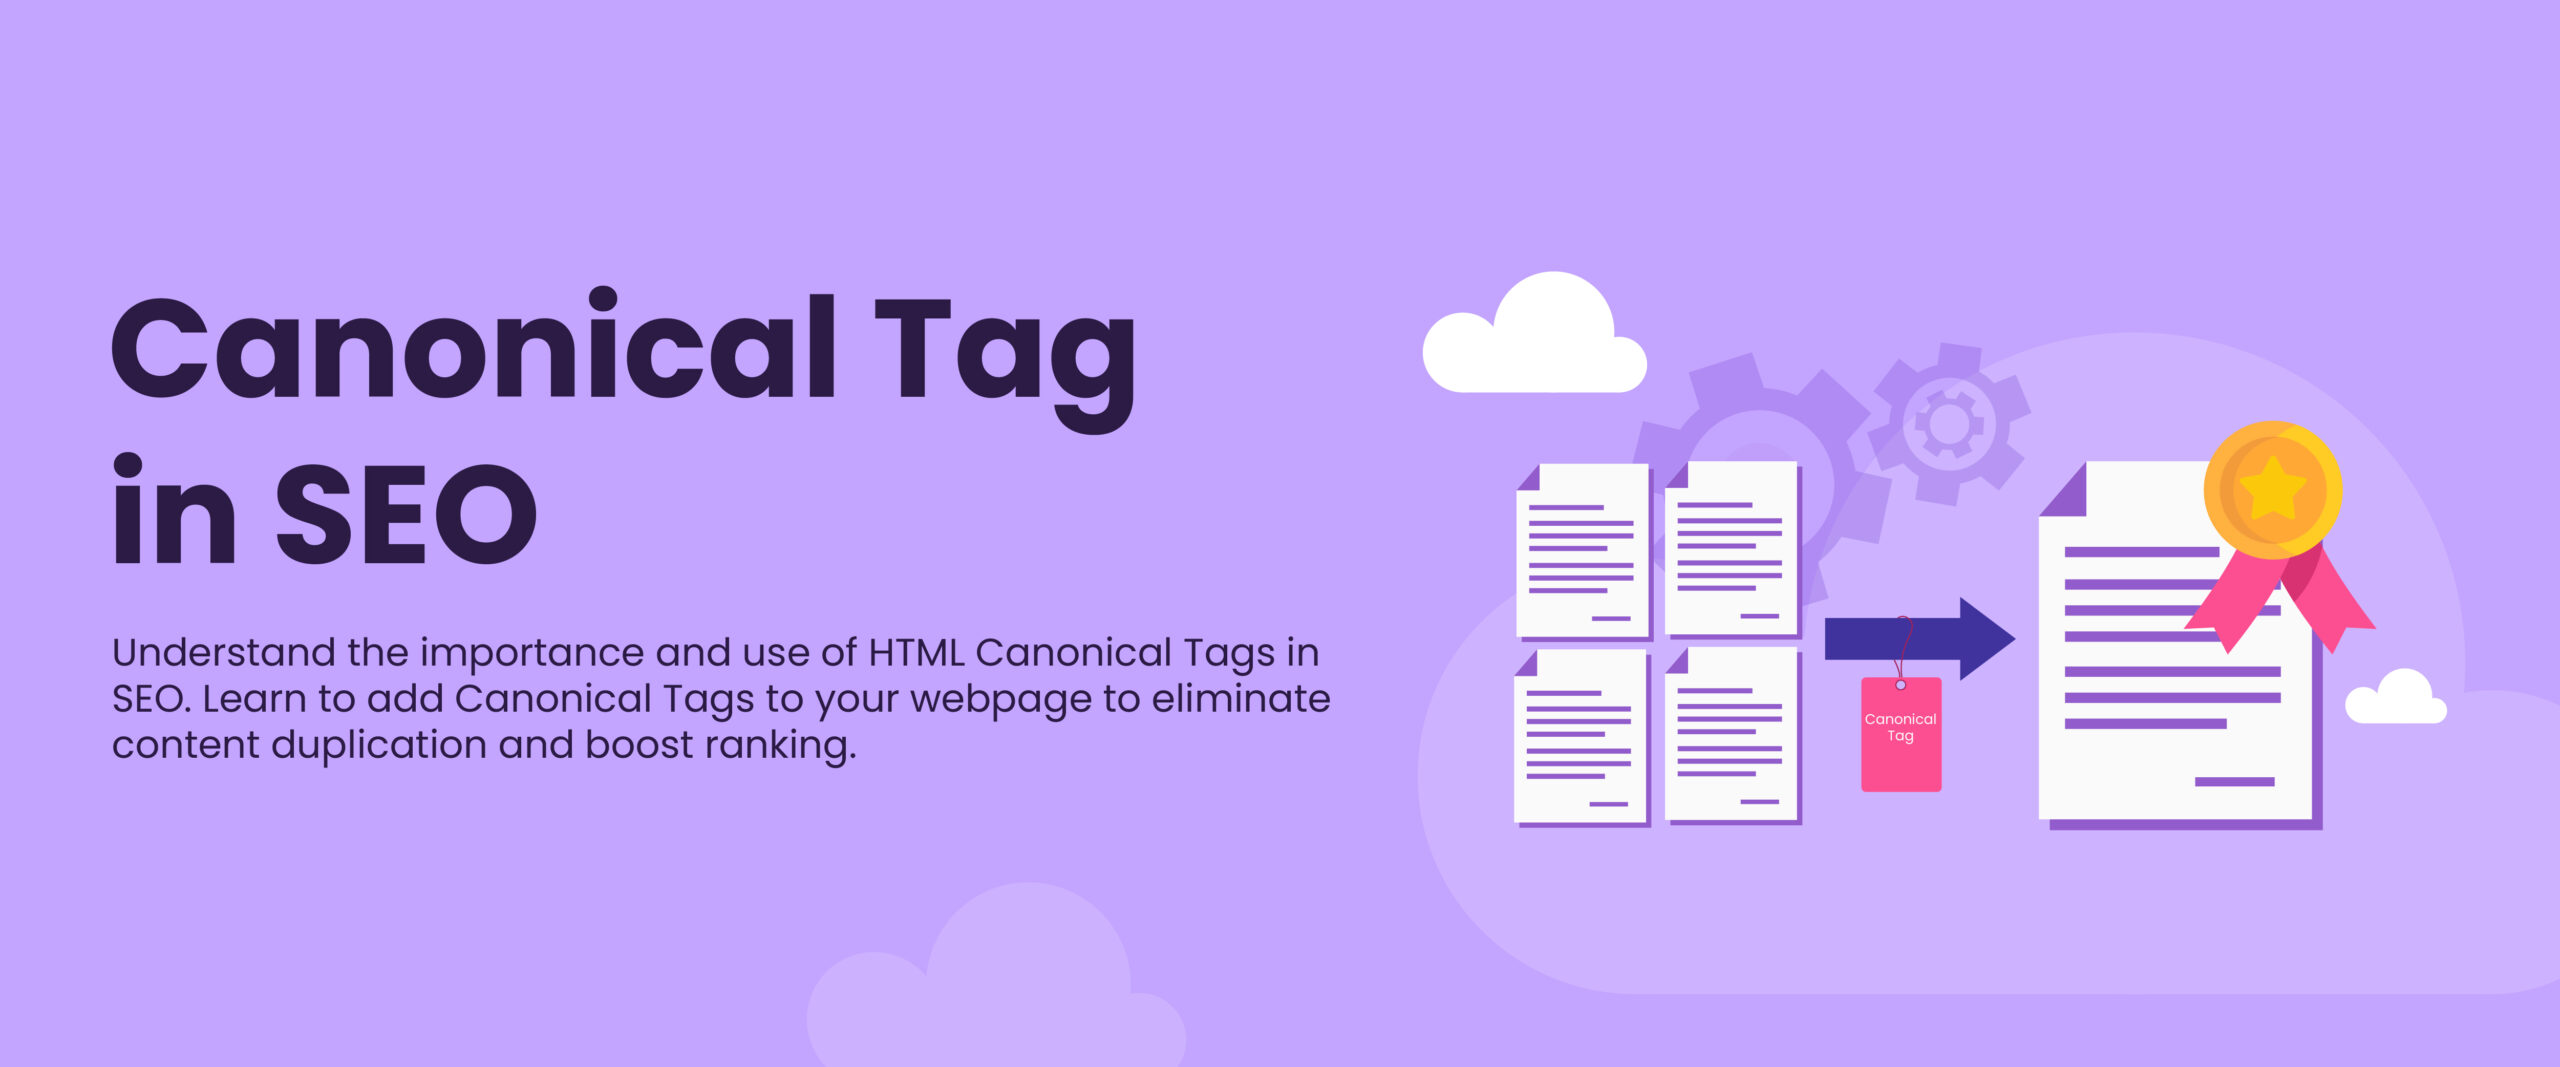 Canonical Tag in SEO